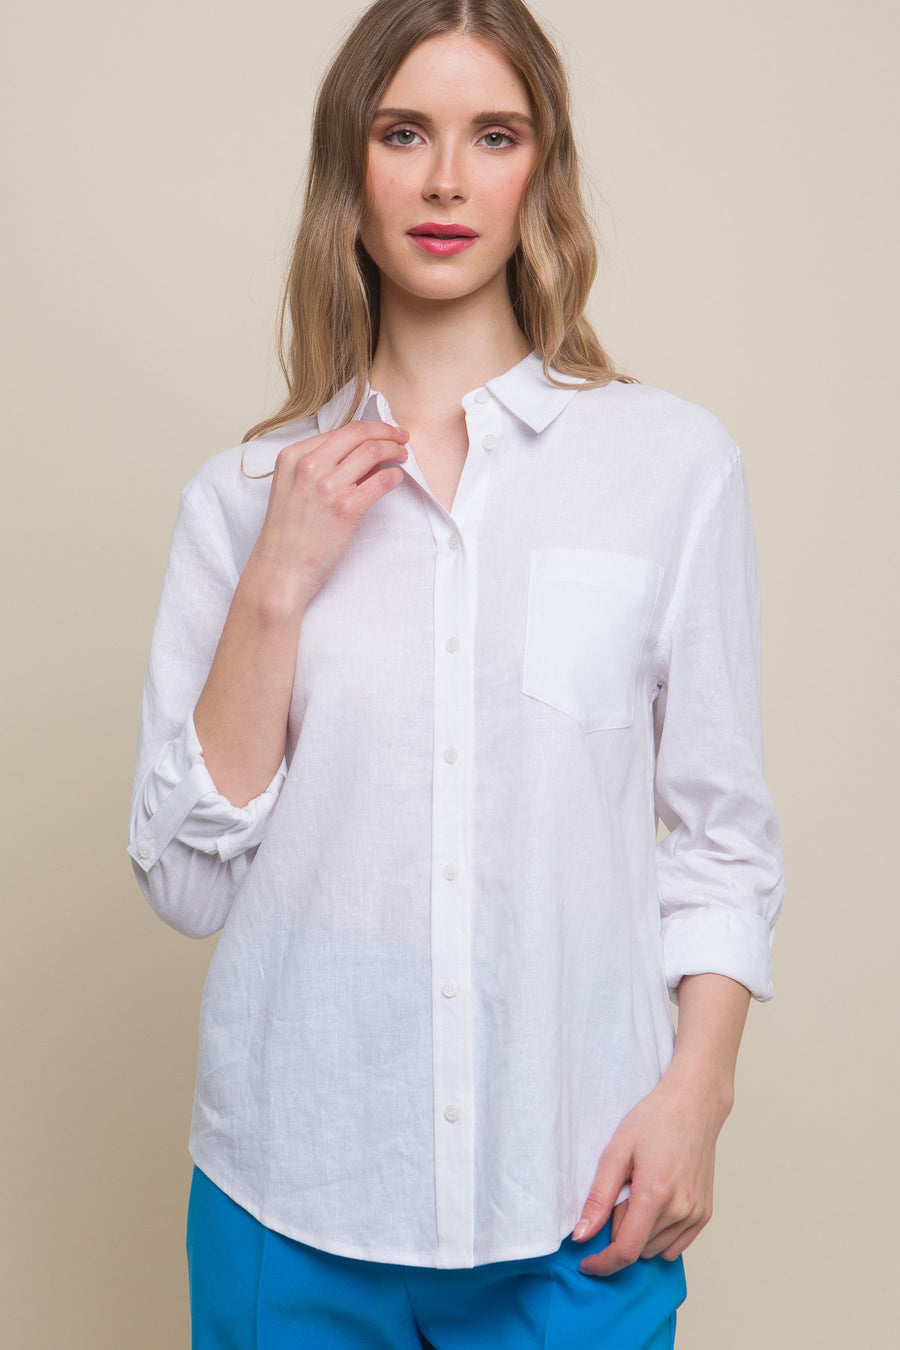 Featuring a collard linen button up with front chest pocket in the color white 